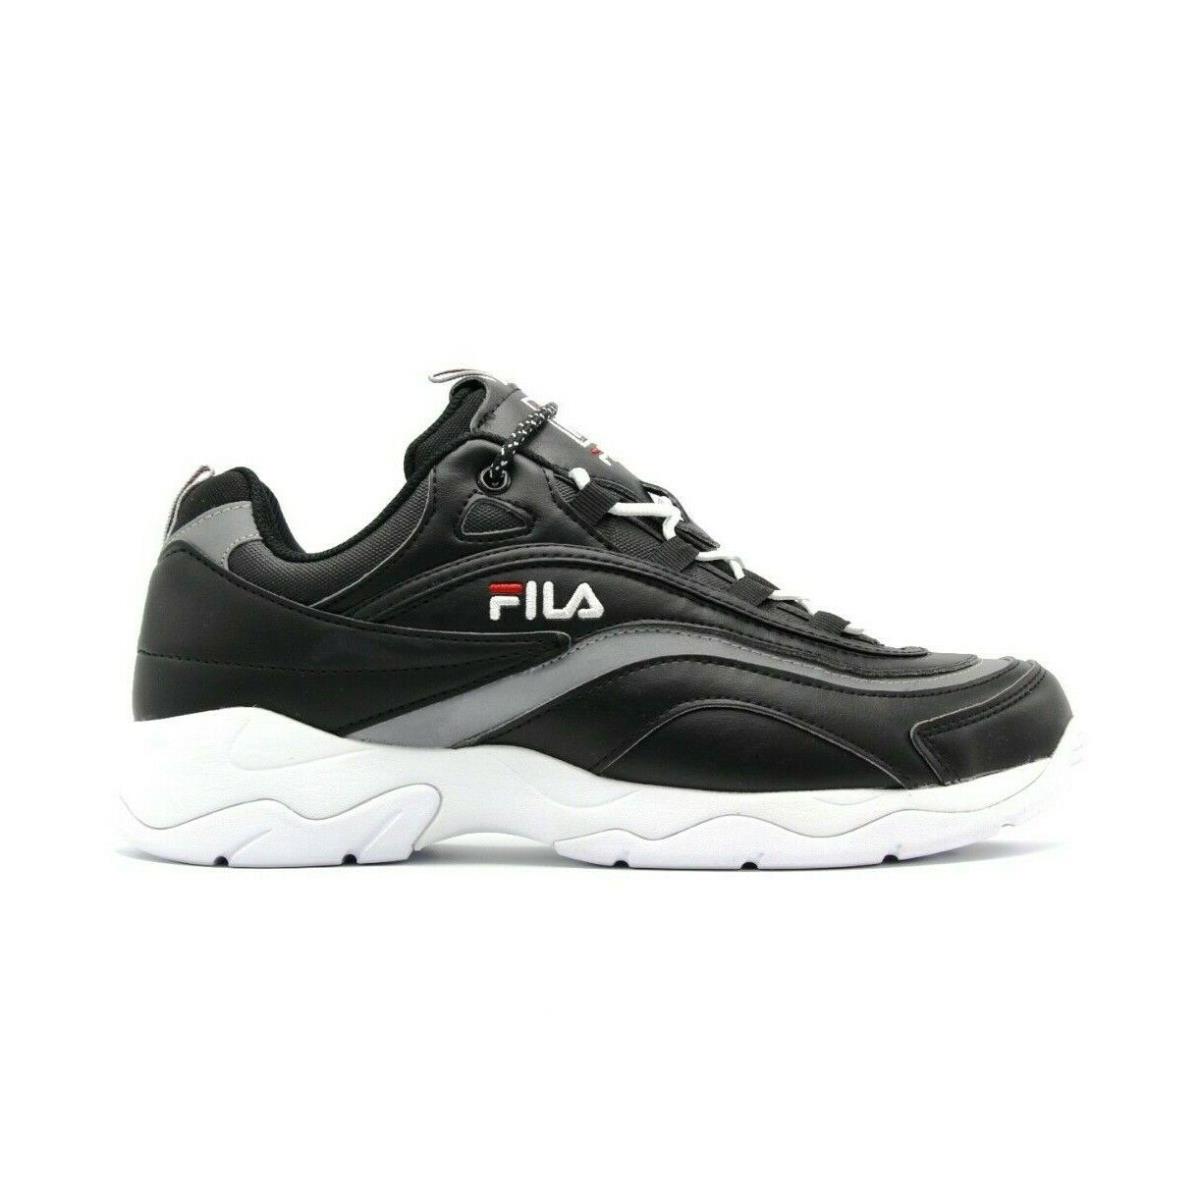 Mens Fila Ray Classic Limited Edition Black Silver Lace UP Comfort Sneakers